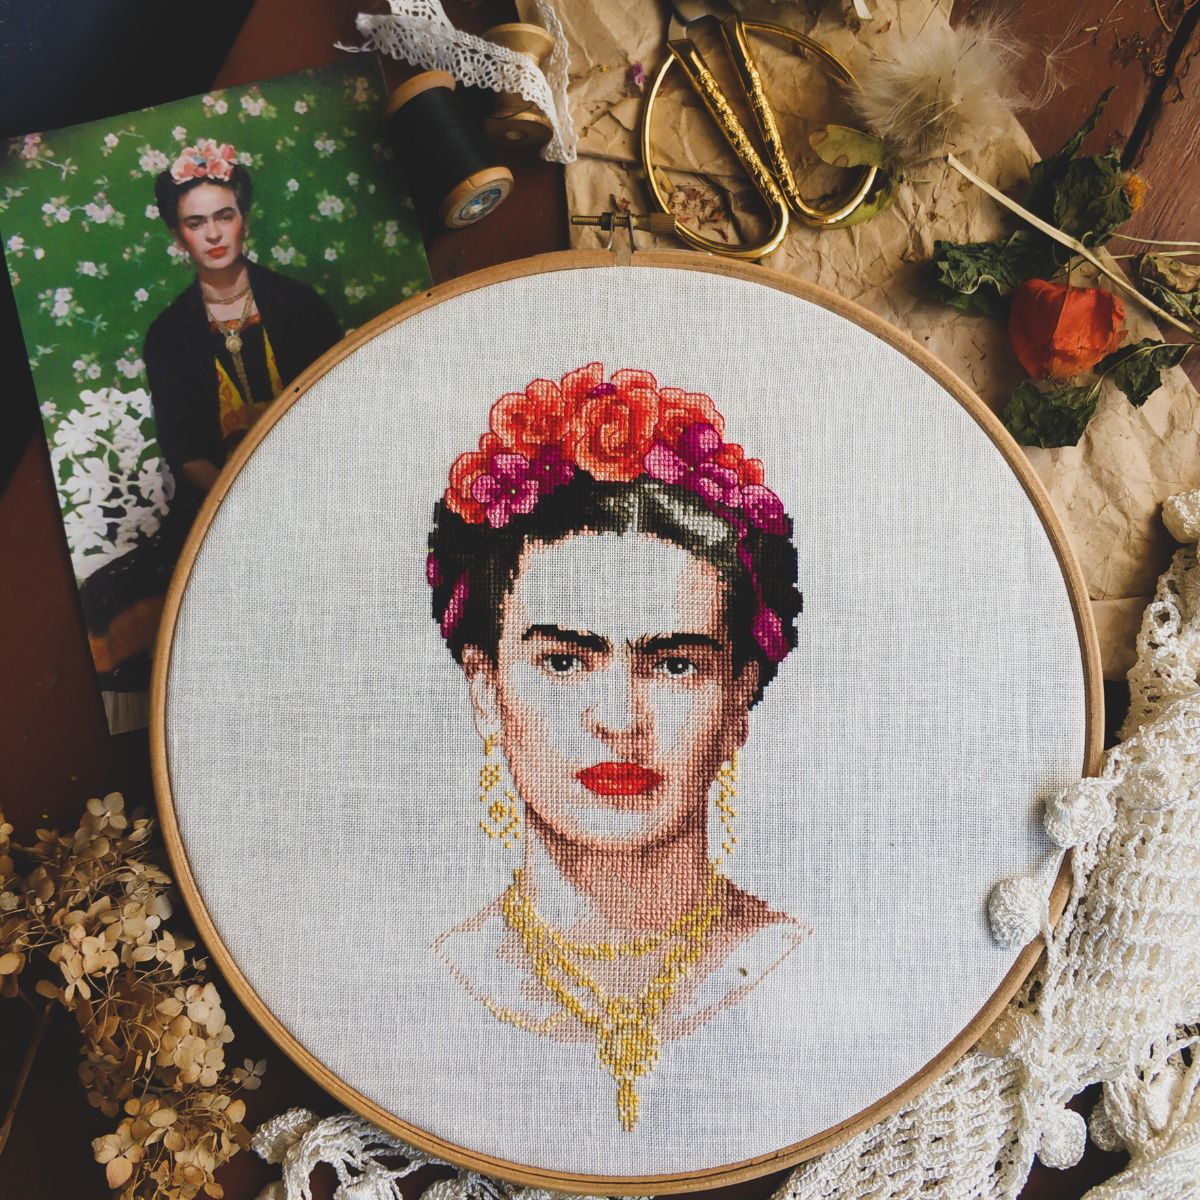 27 Face Embroidery Ideas Of Different Kinds Of Faces - meshthread.com